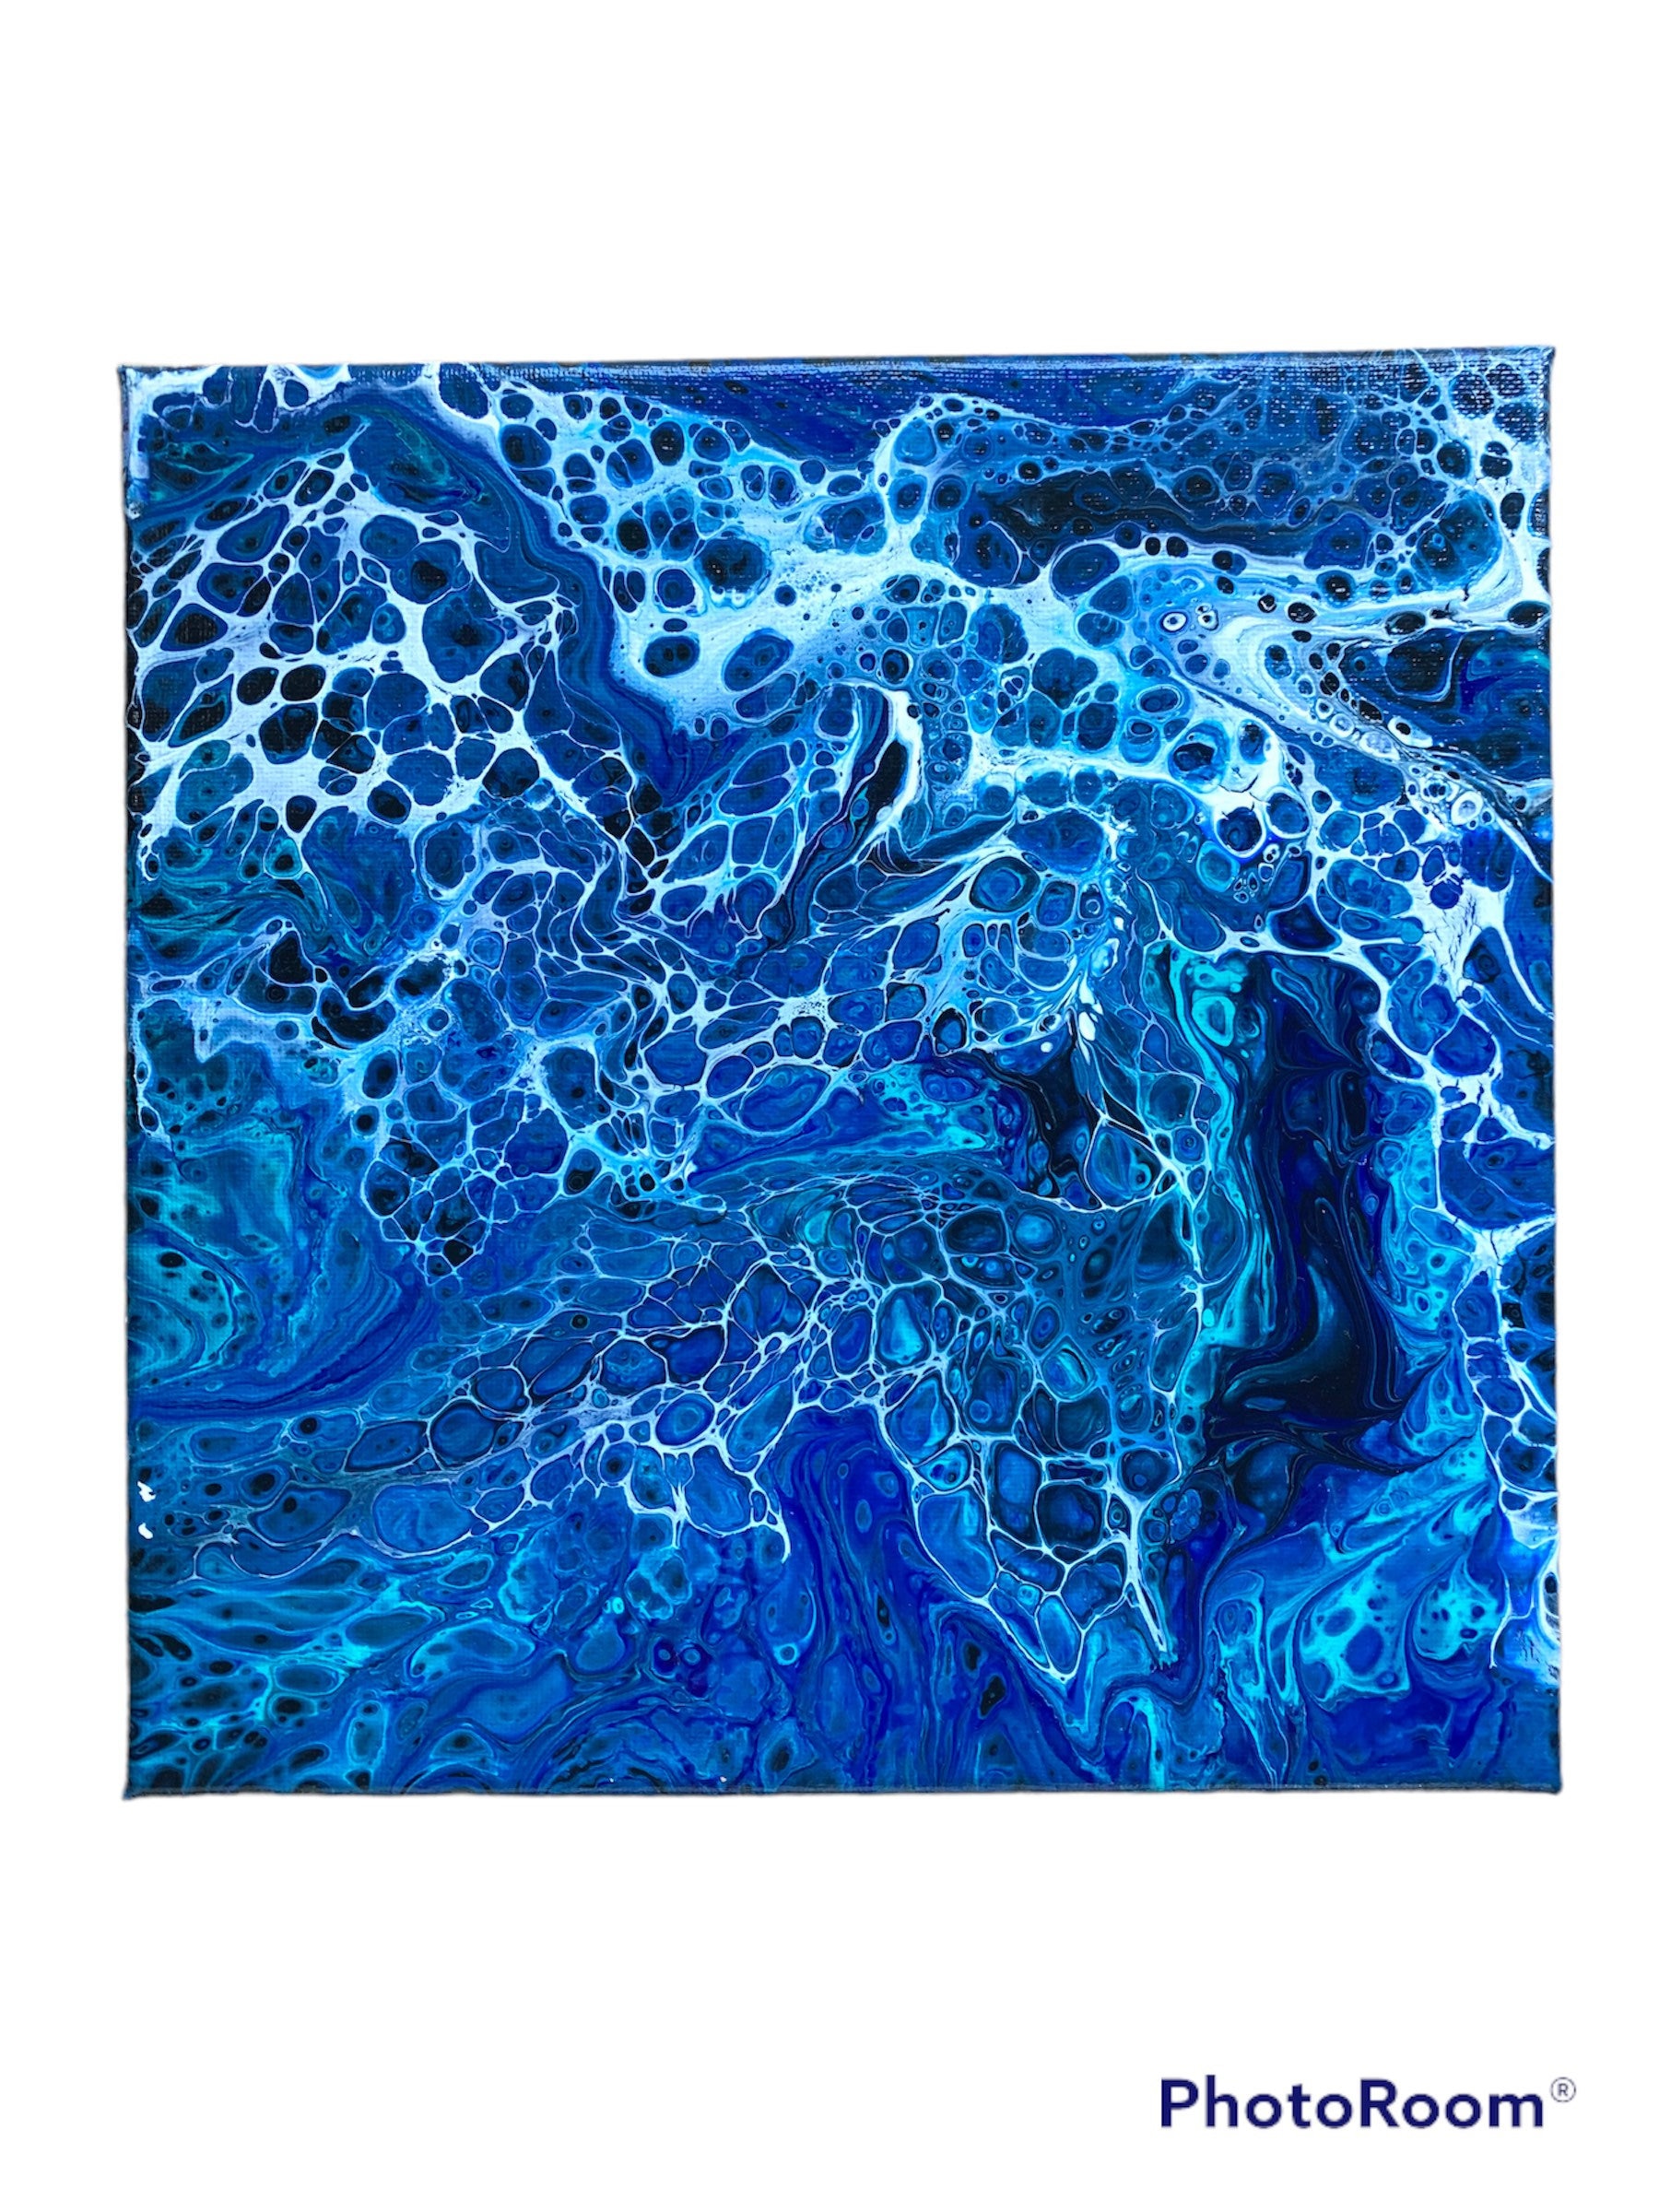 Blue Teal and White 10x10 Canvas, fluid Art, Acrylic Pour Painting,  Abstract Painting on Canvas, Wall Art, Wall Decor